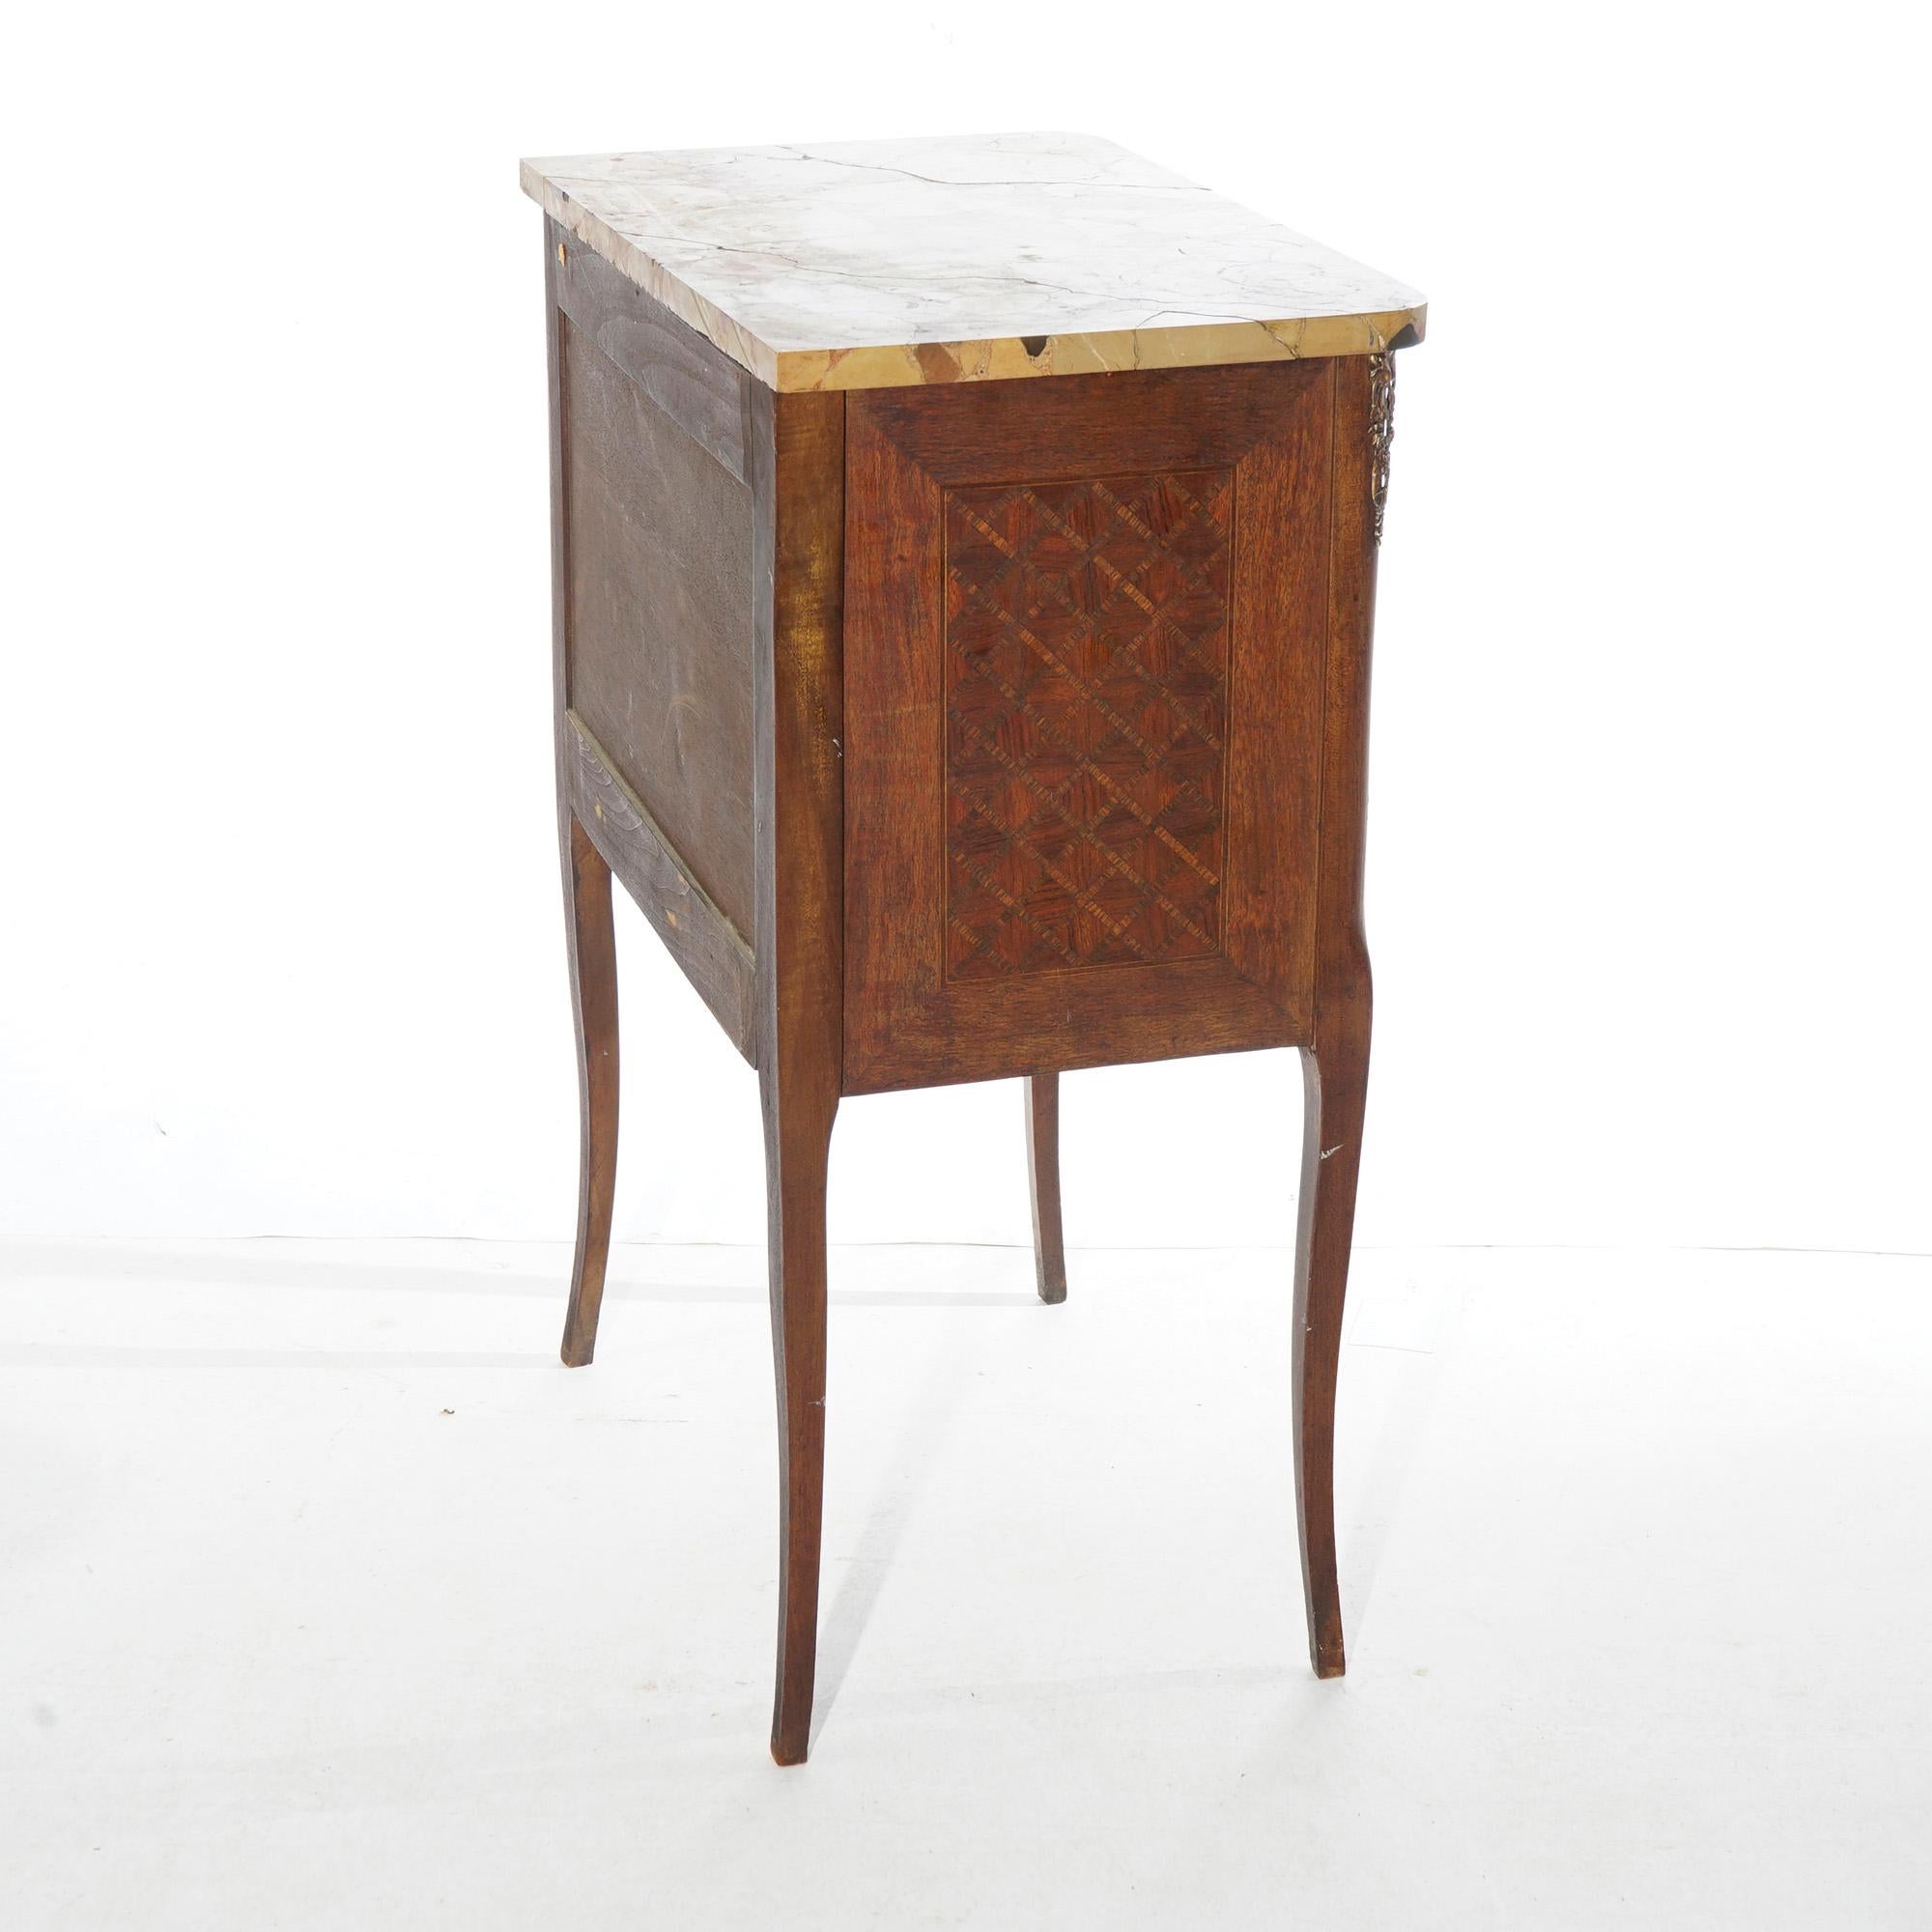 20th Century Antique Pair French Kingwood Satinwood Inlaid Marble Top Side Tables circa 1910 For Sale